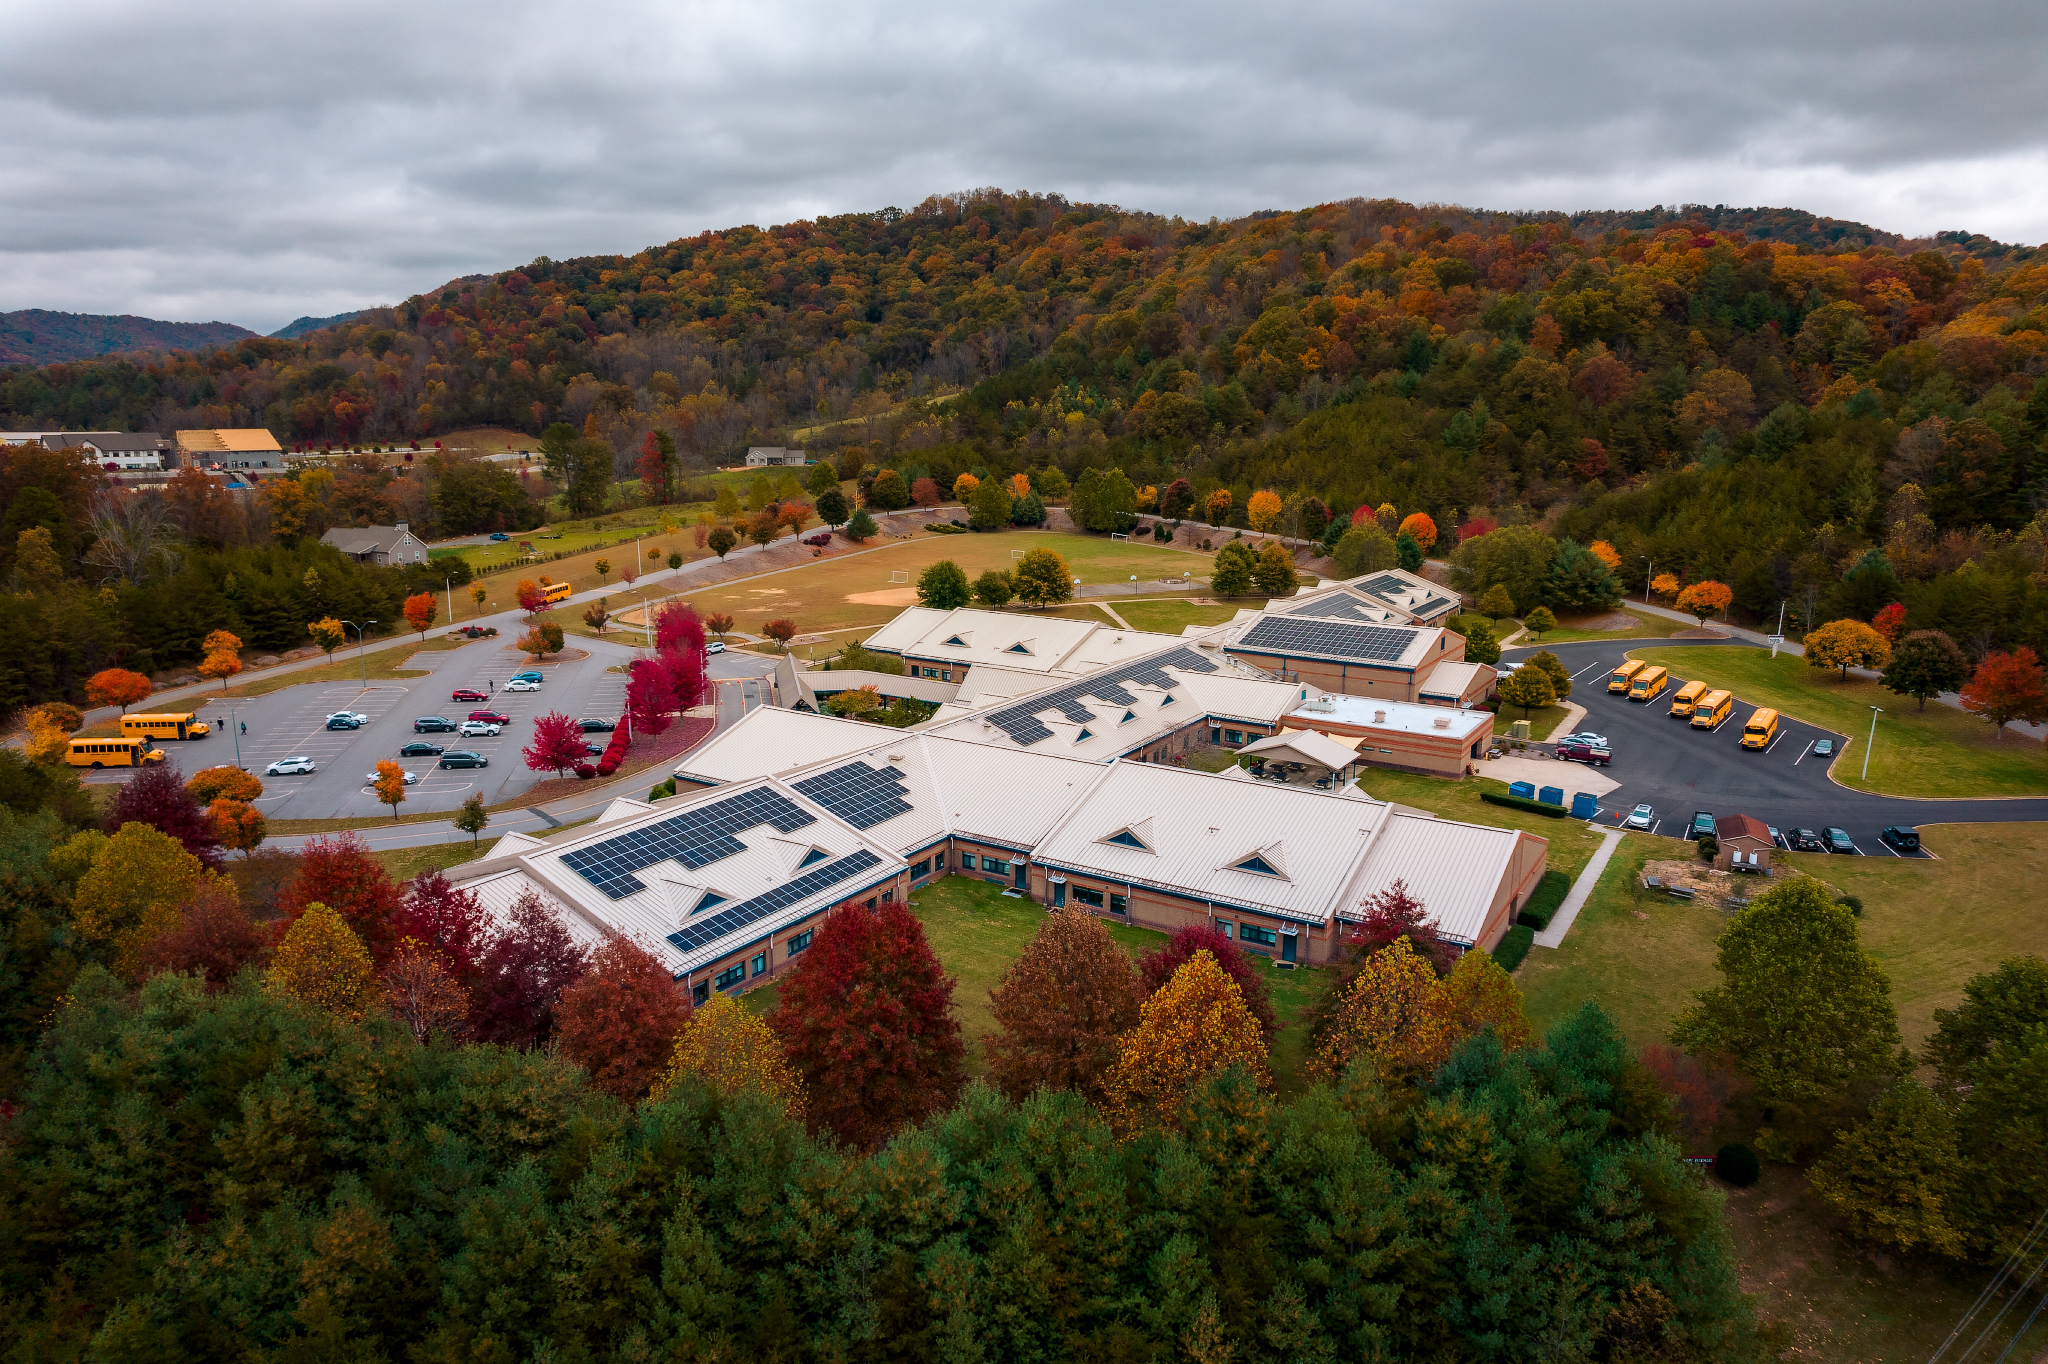 Drone photo of the school in the fall.